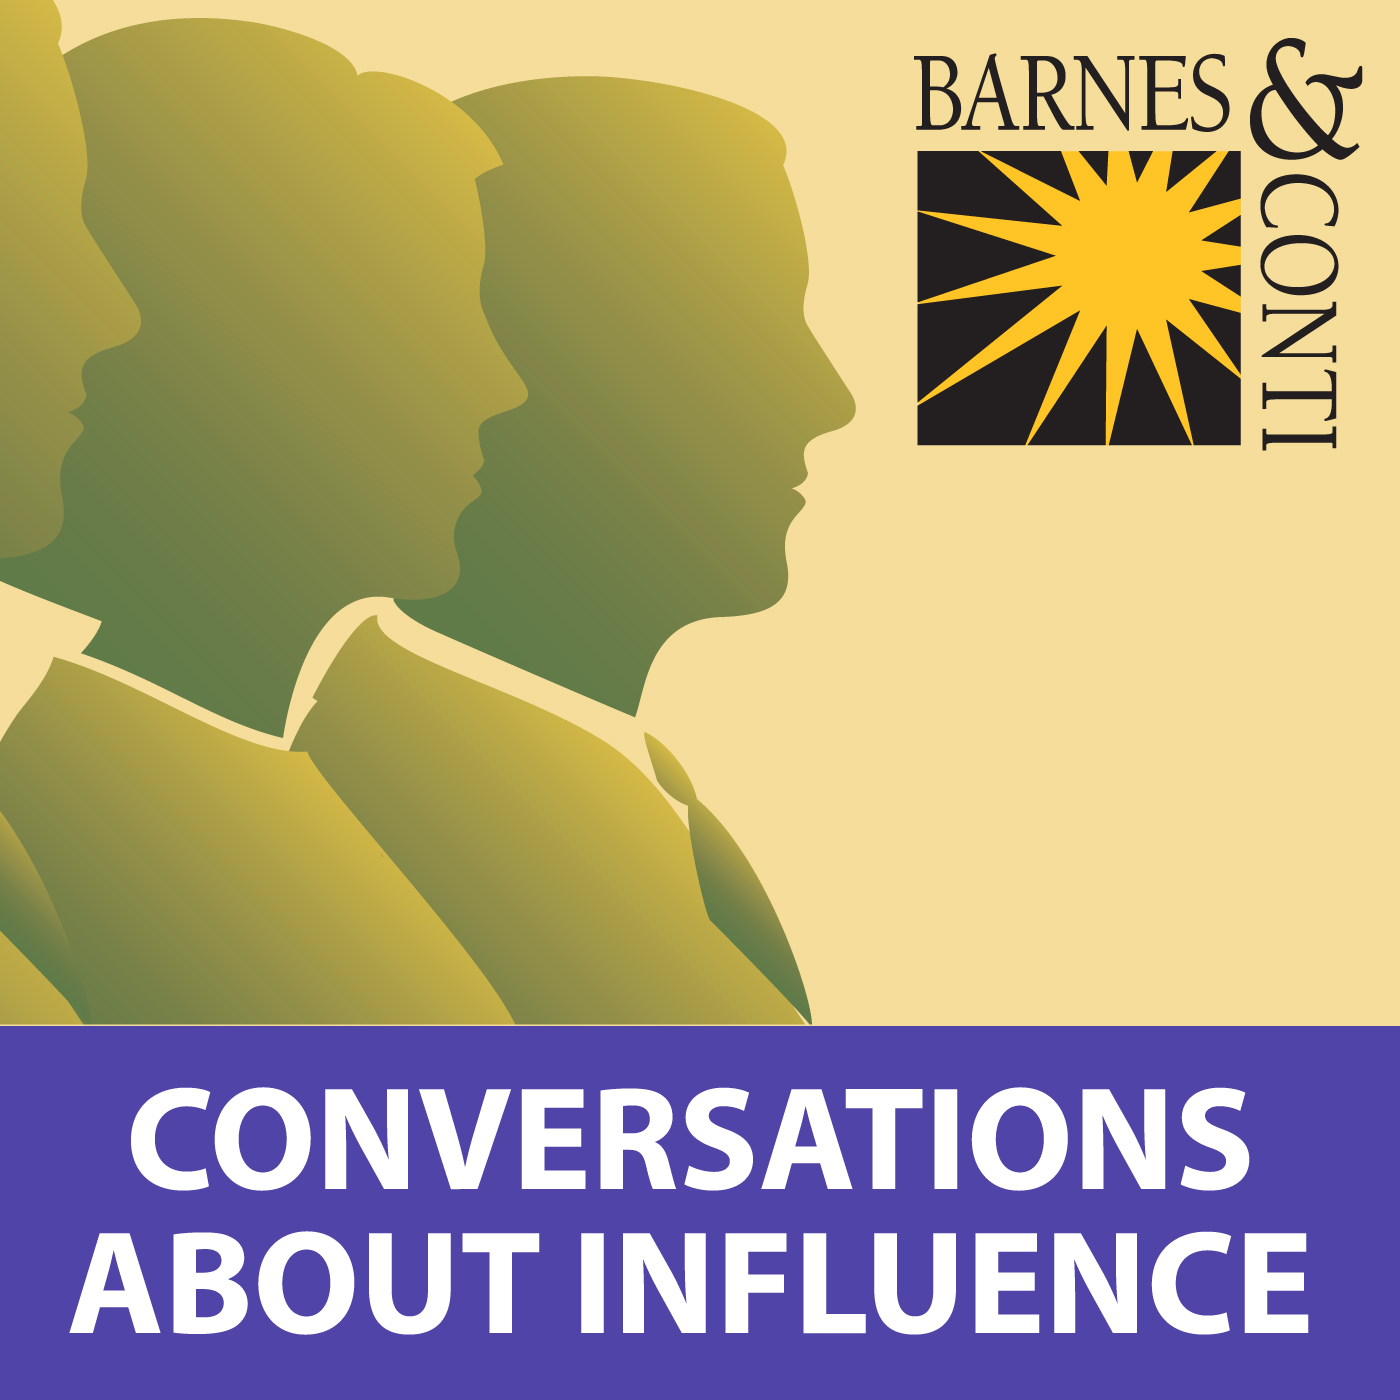 Conversations About Influence